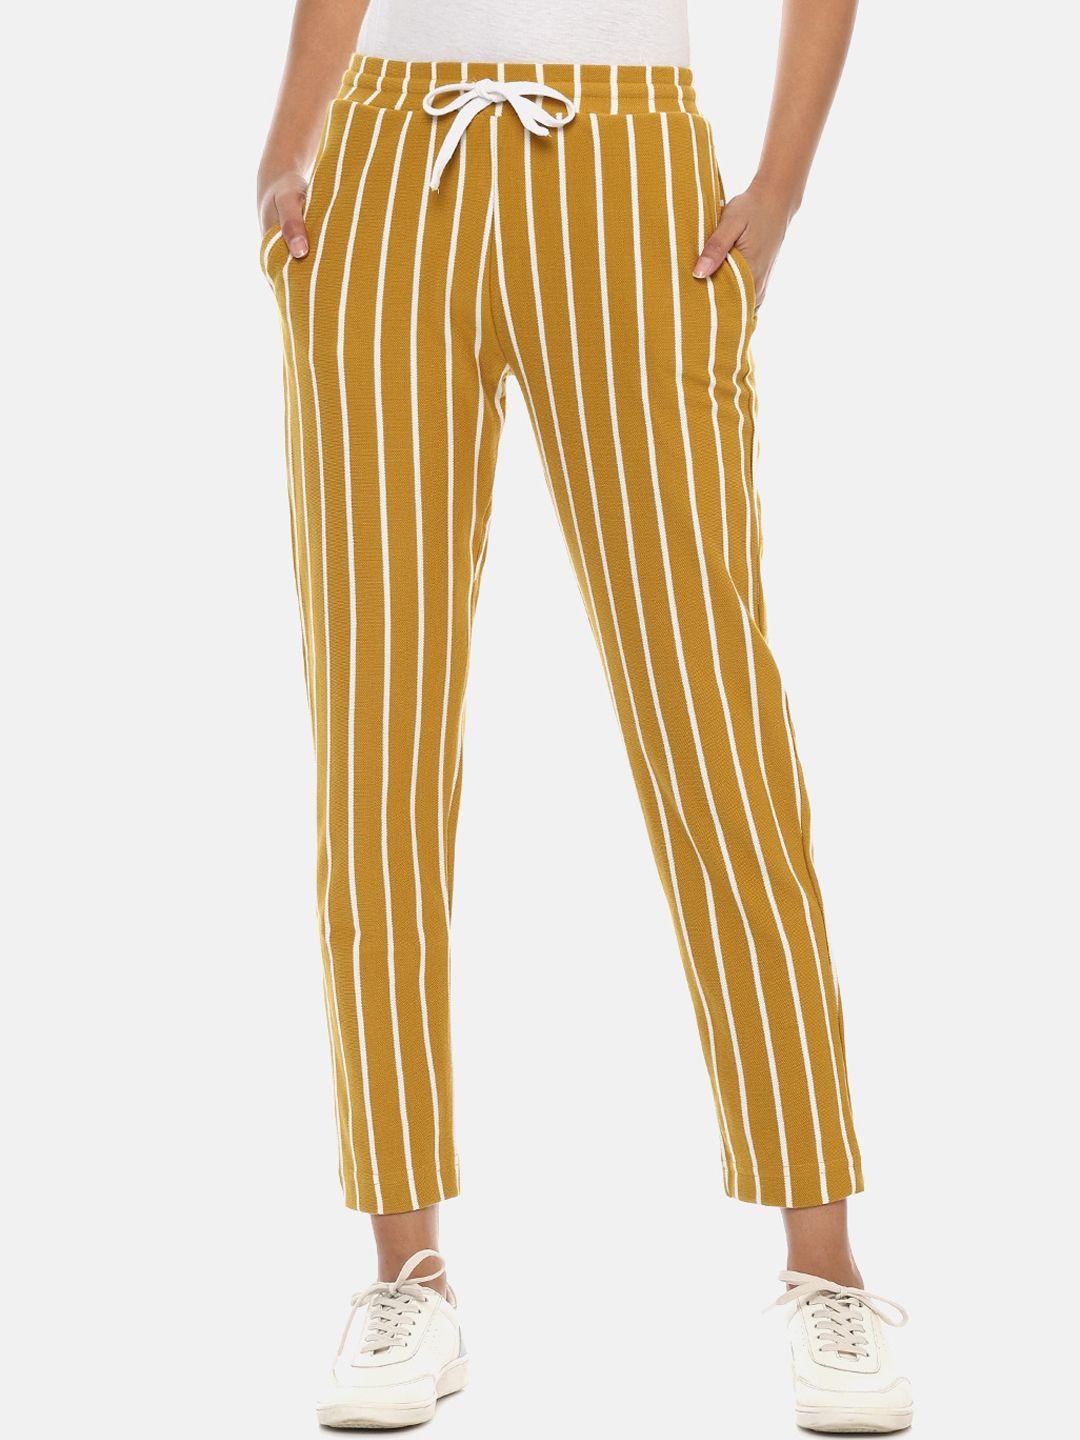 campus-sutra-women-mustard-yellow-&-white-striped-cotton-slim-fit-track-pants